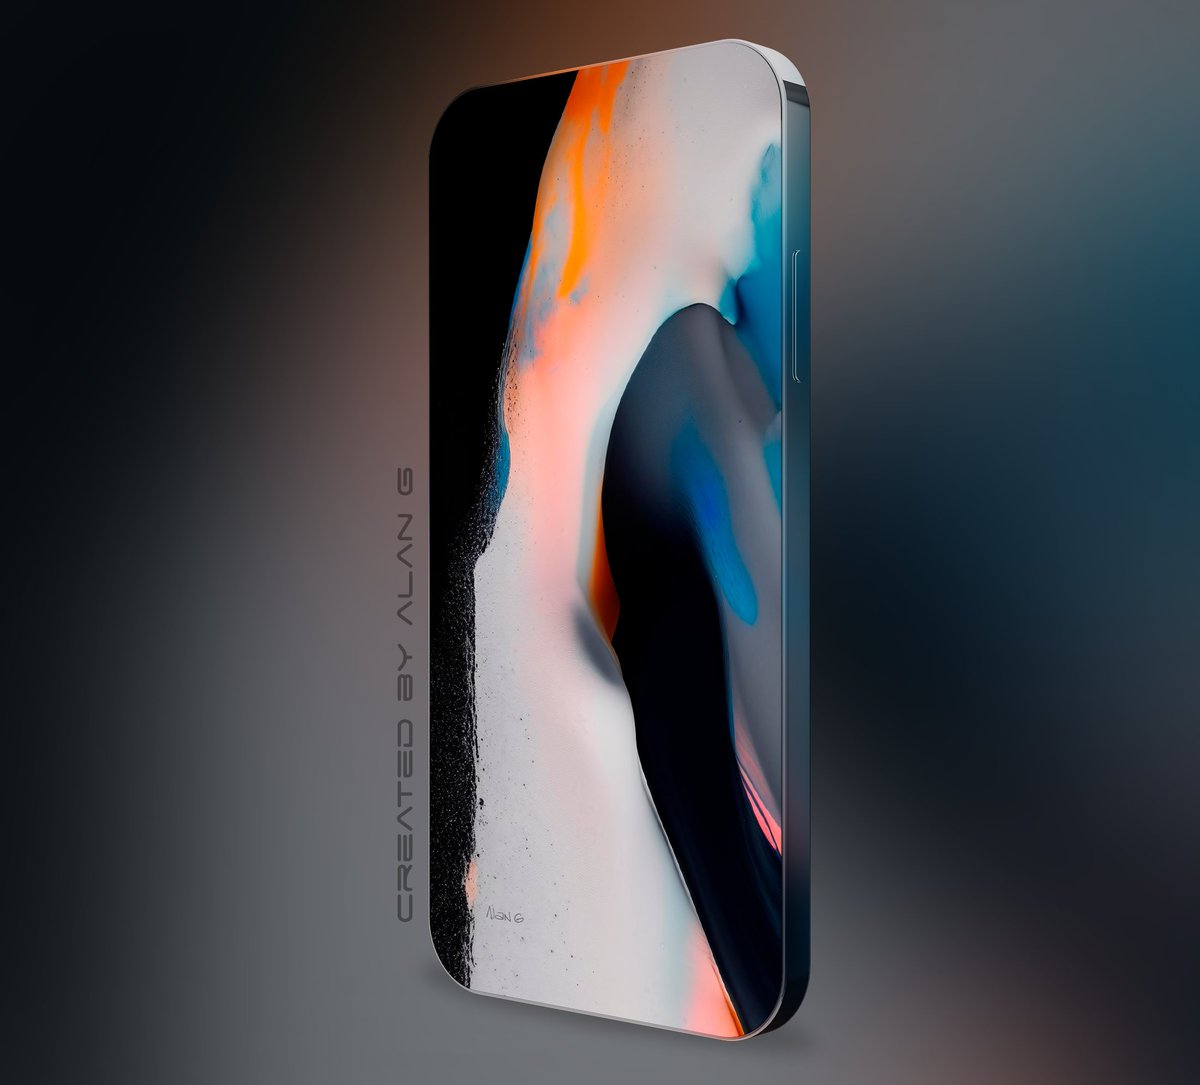 New wallpaper
t.me/G_Walls/6154

#free #abstract #abstractart #amoled #3d #wallpaper #IphoneWallpaper #ios #ios16 #ios17 #pixel #android #android15 #telegram #telegramchannel